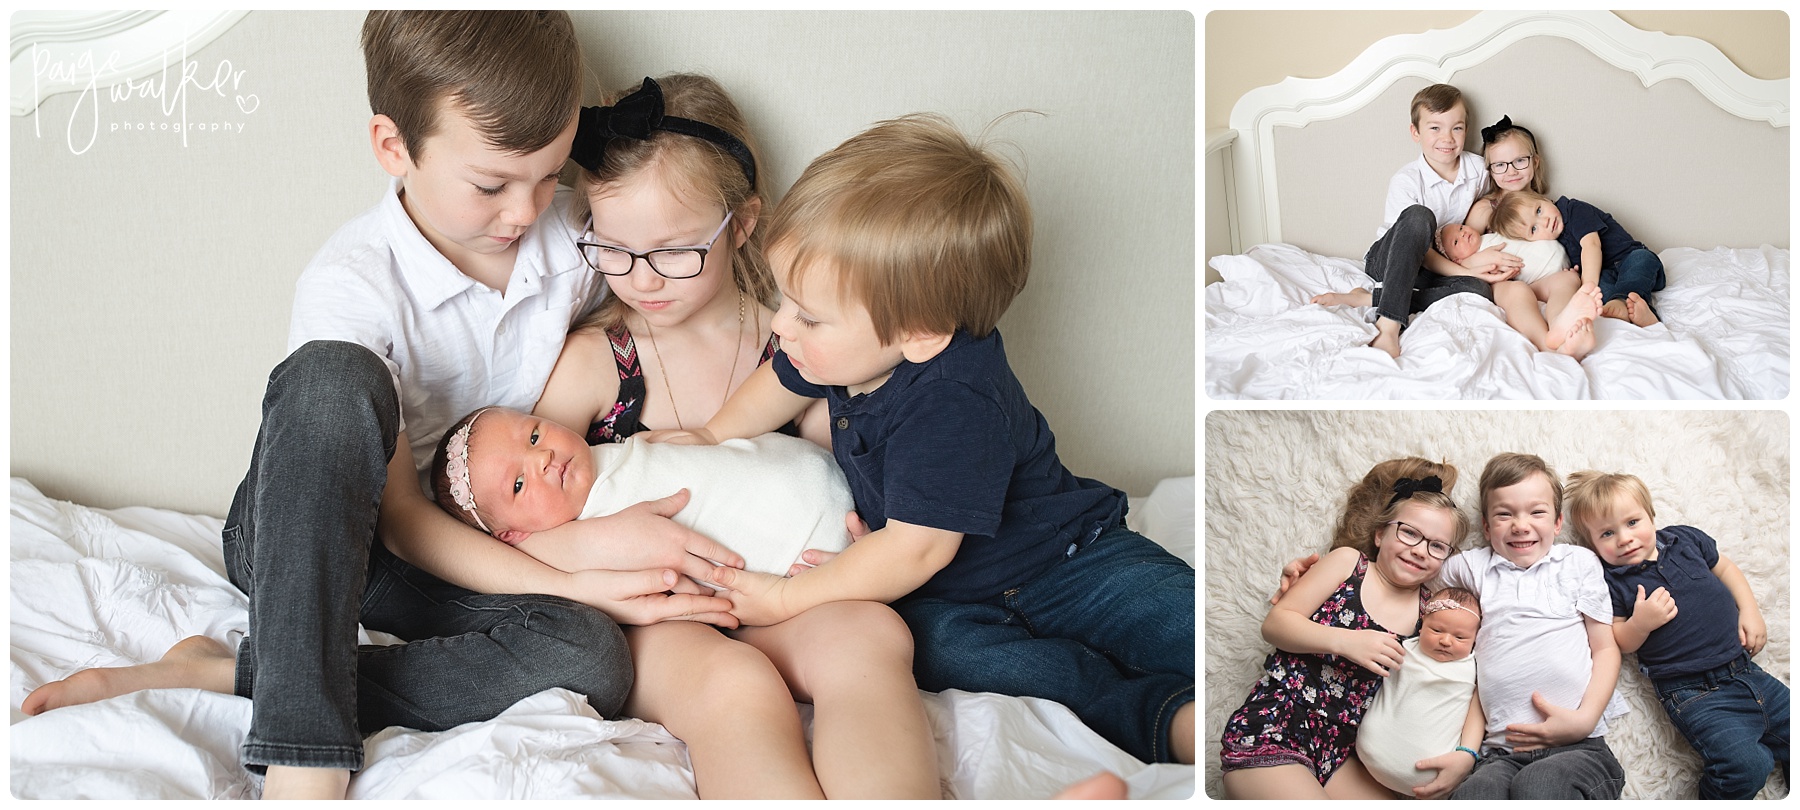 brother and sisters loving on their new baby sister